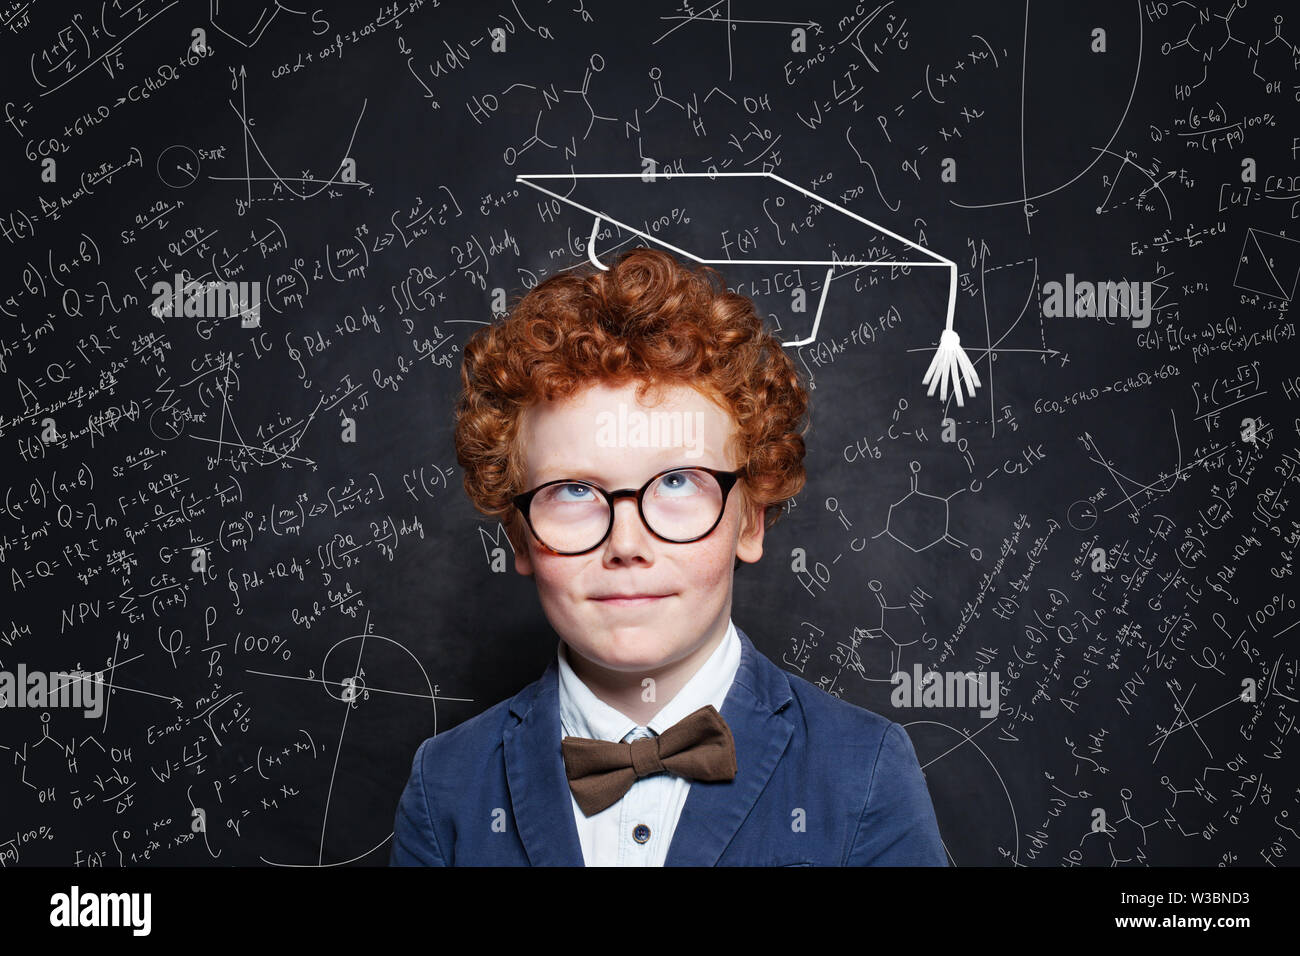 Little child boy thinking on blackboard background. Brainstorming and idea concept Stock Photo